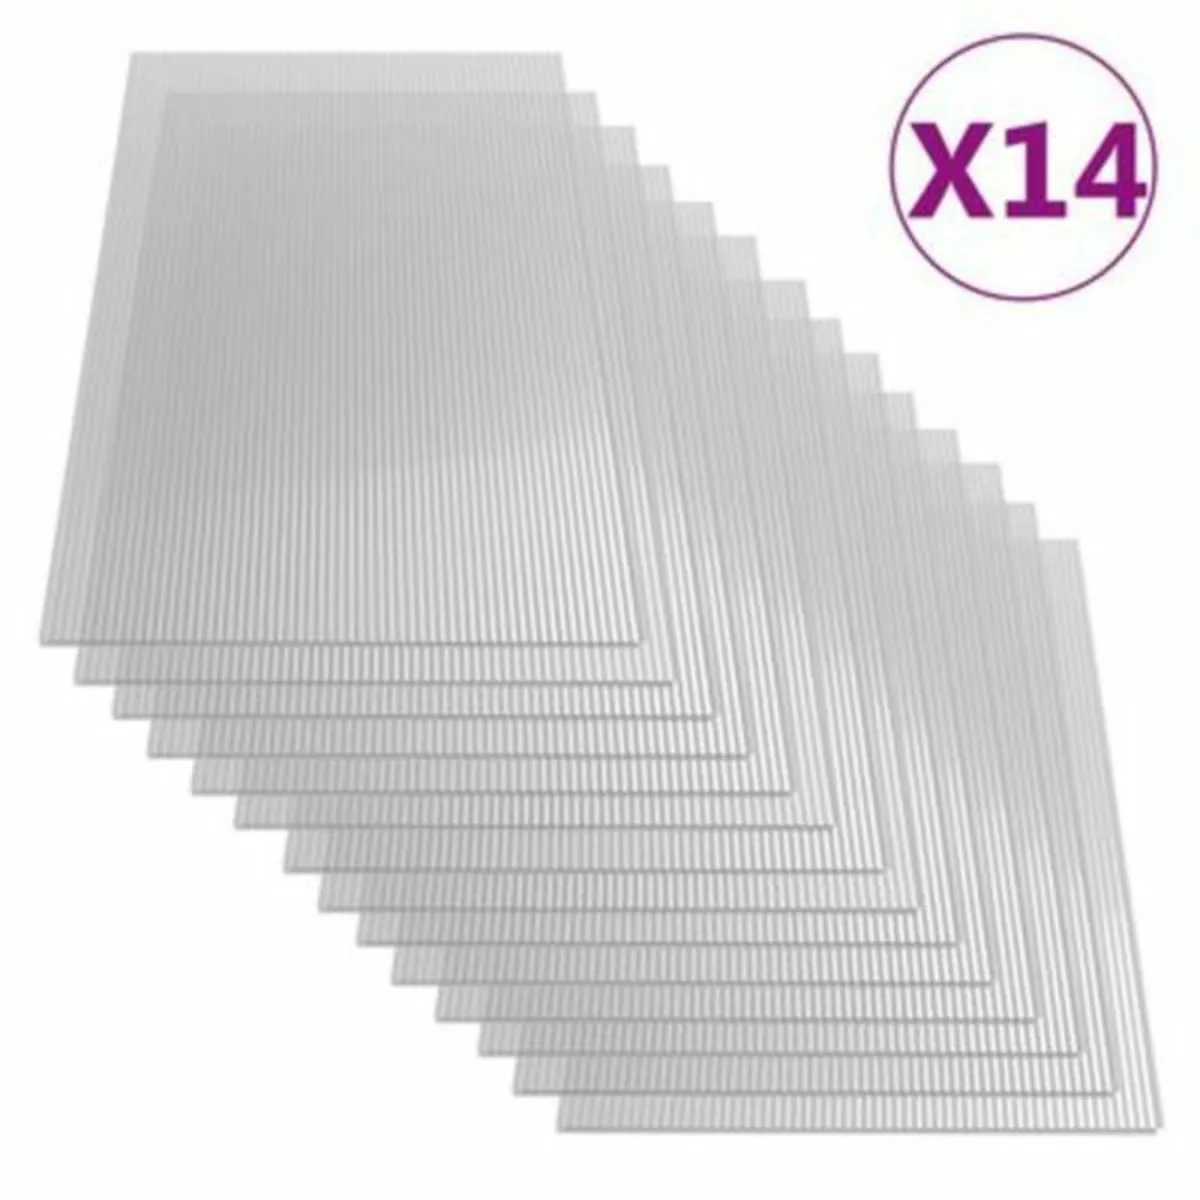 14 Polycarbonate sheets 1210mm x 605mm